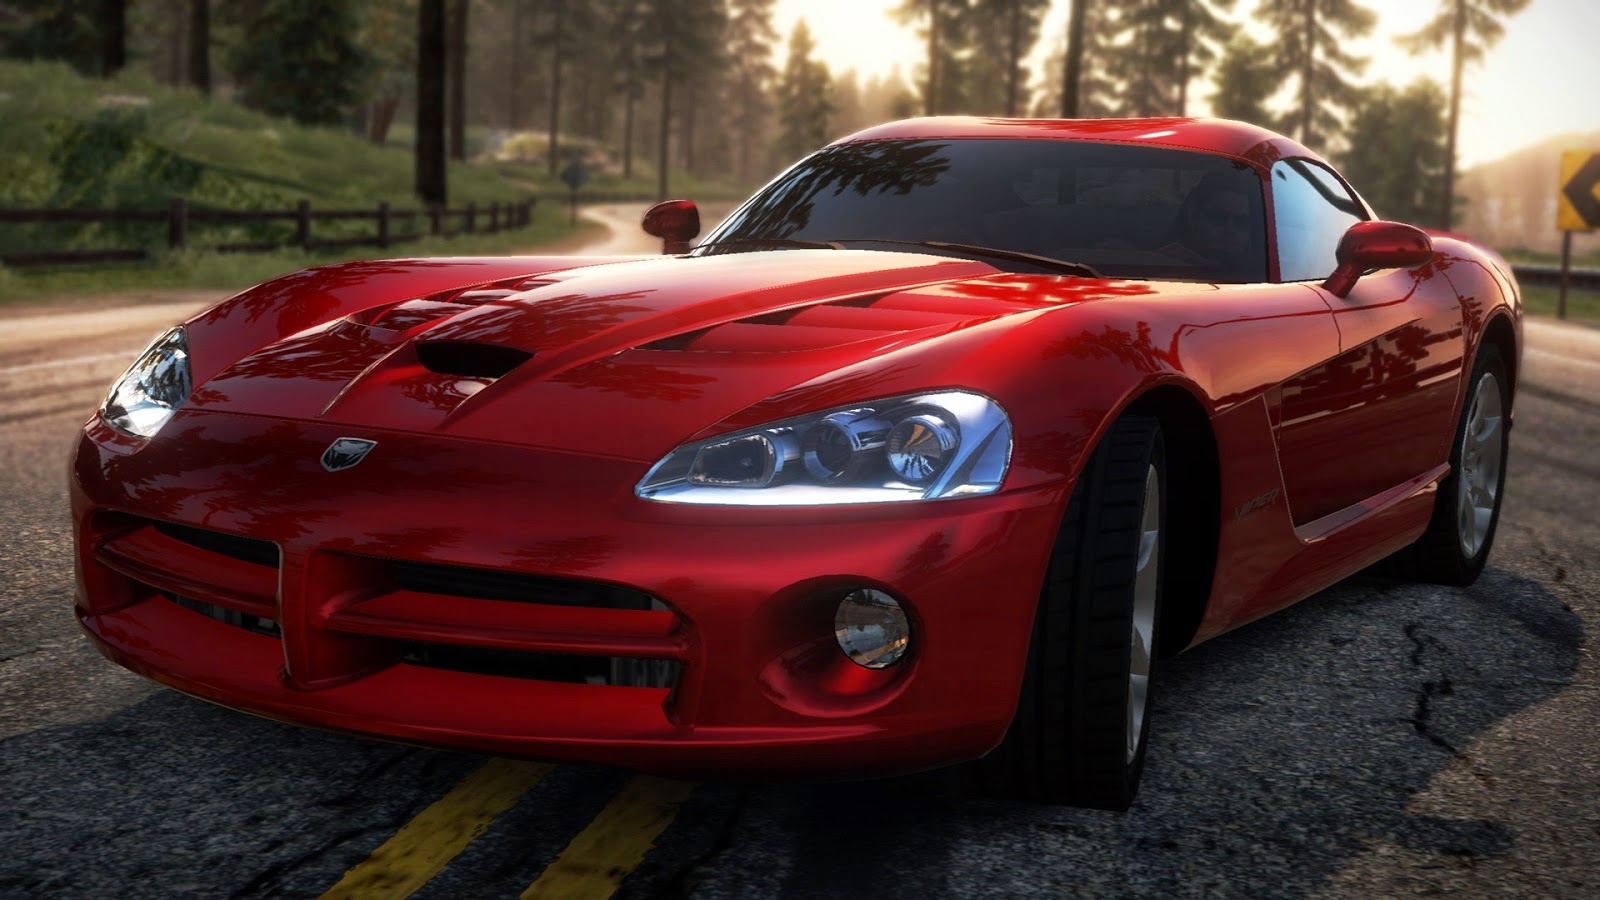 need for speed iphone wallpaper,land vehicle,vehicle,car,sports car,red